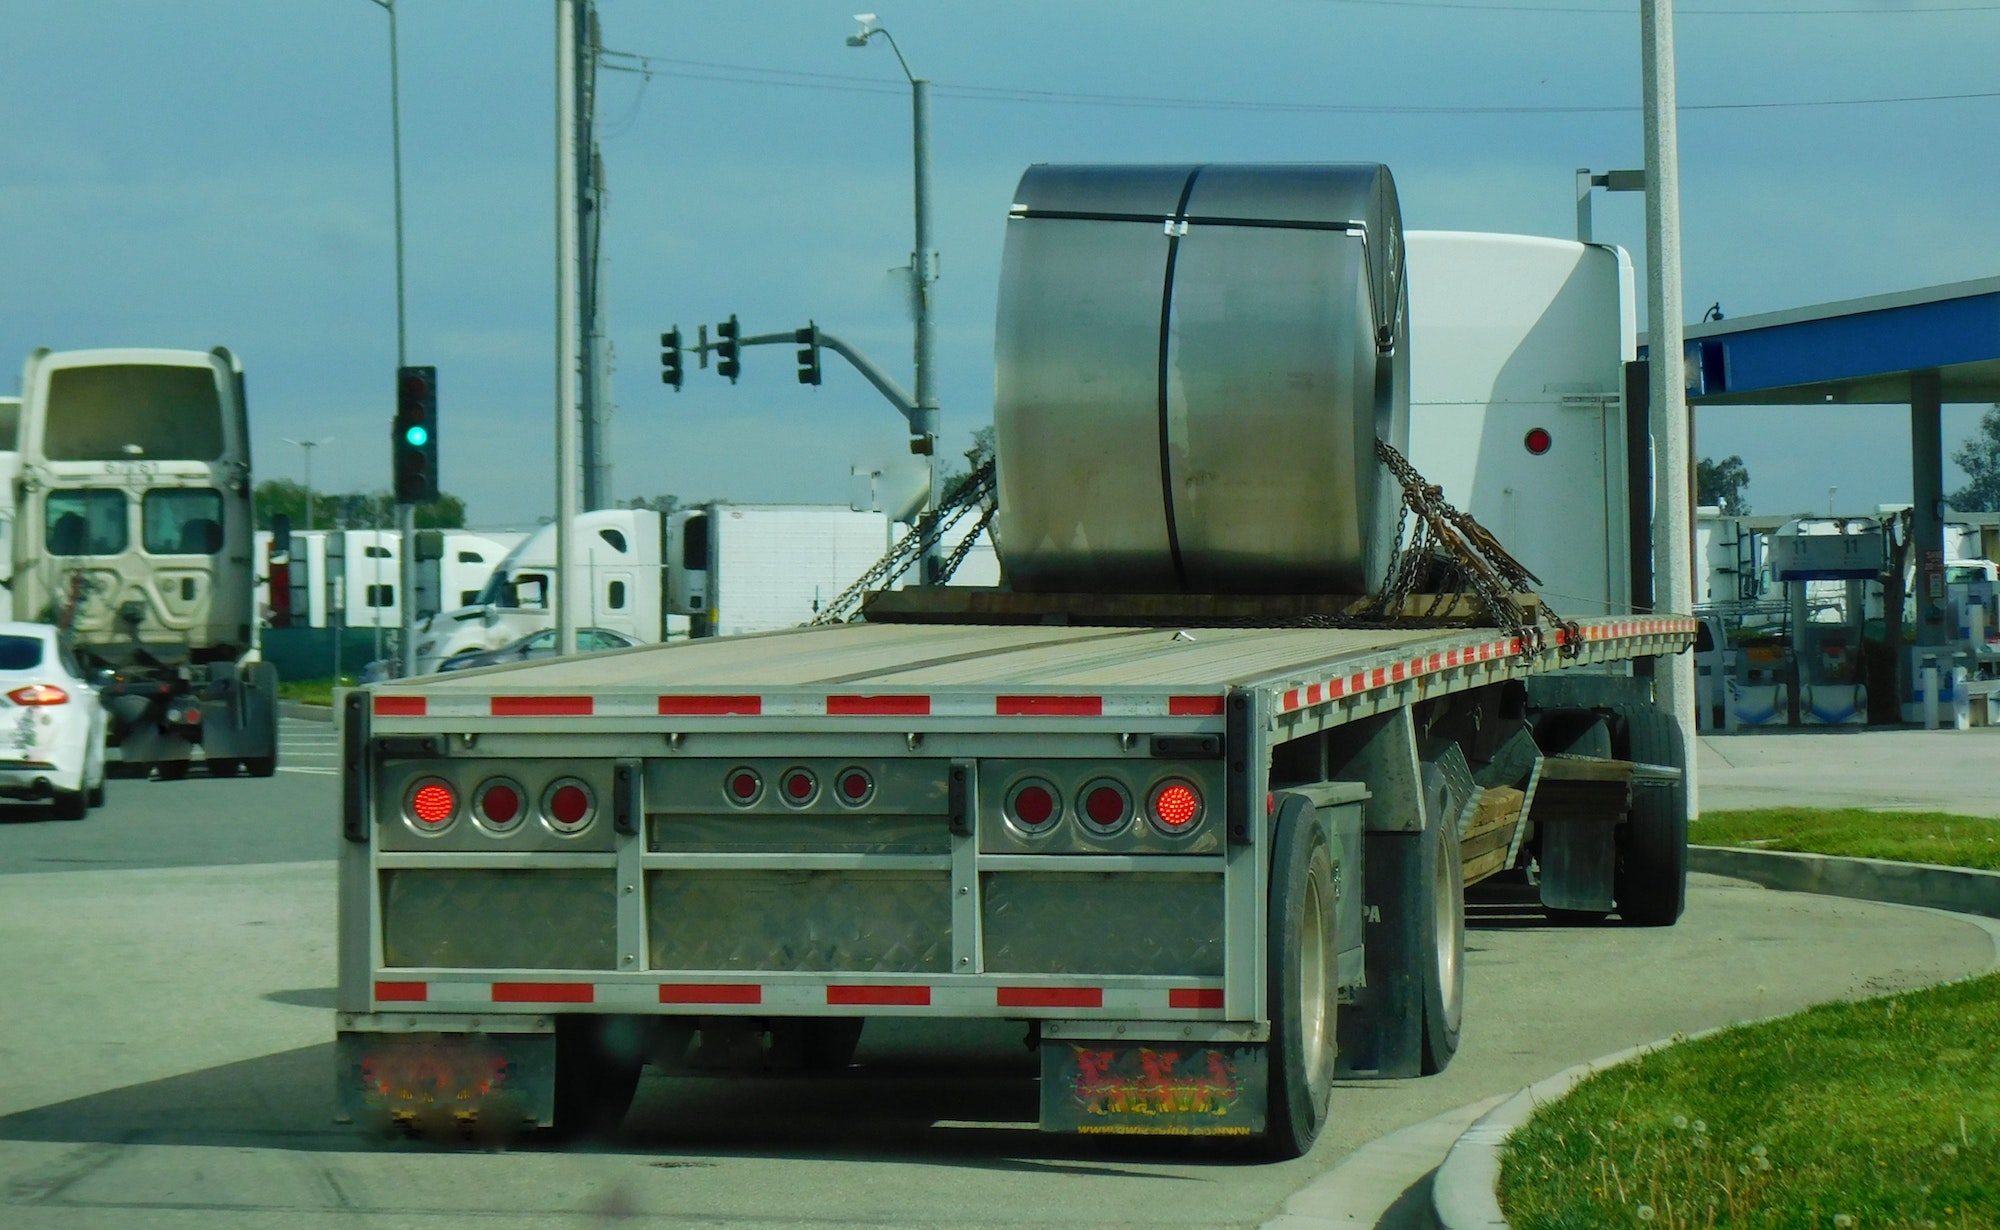 Transportation and Logistics! A large metal spool being hauled on a flat bed truck.